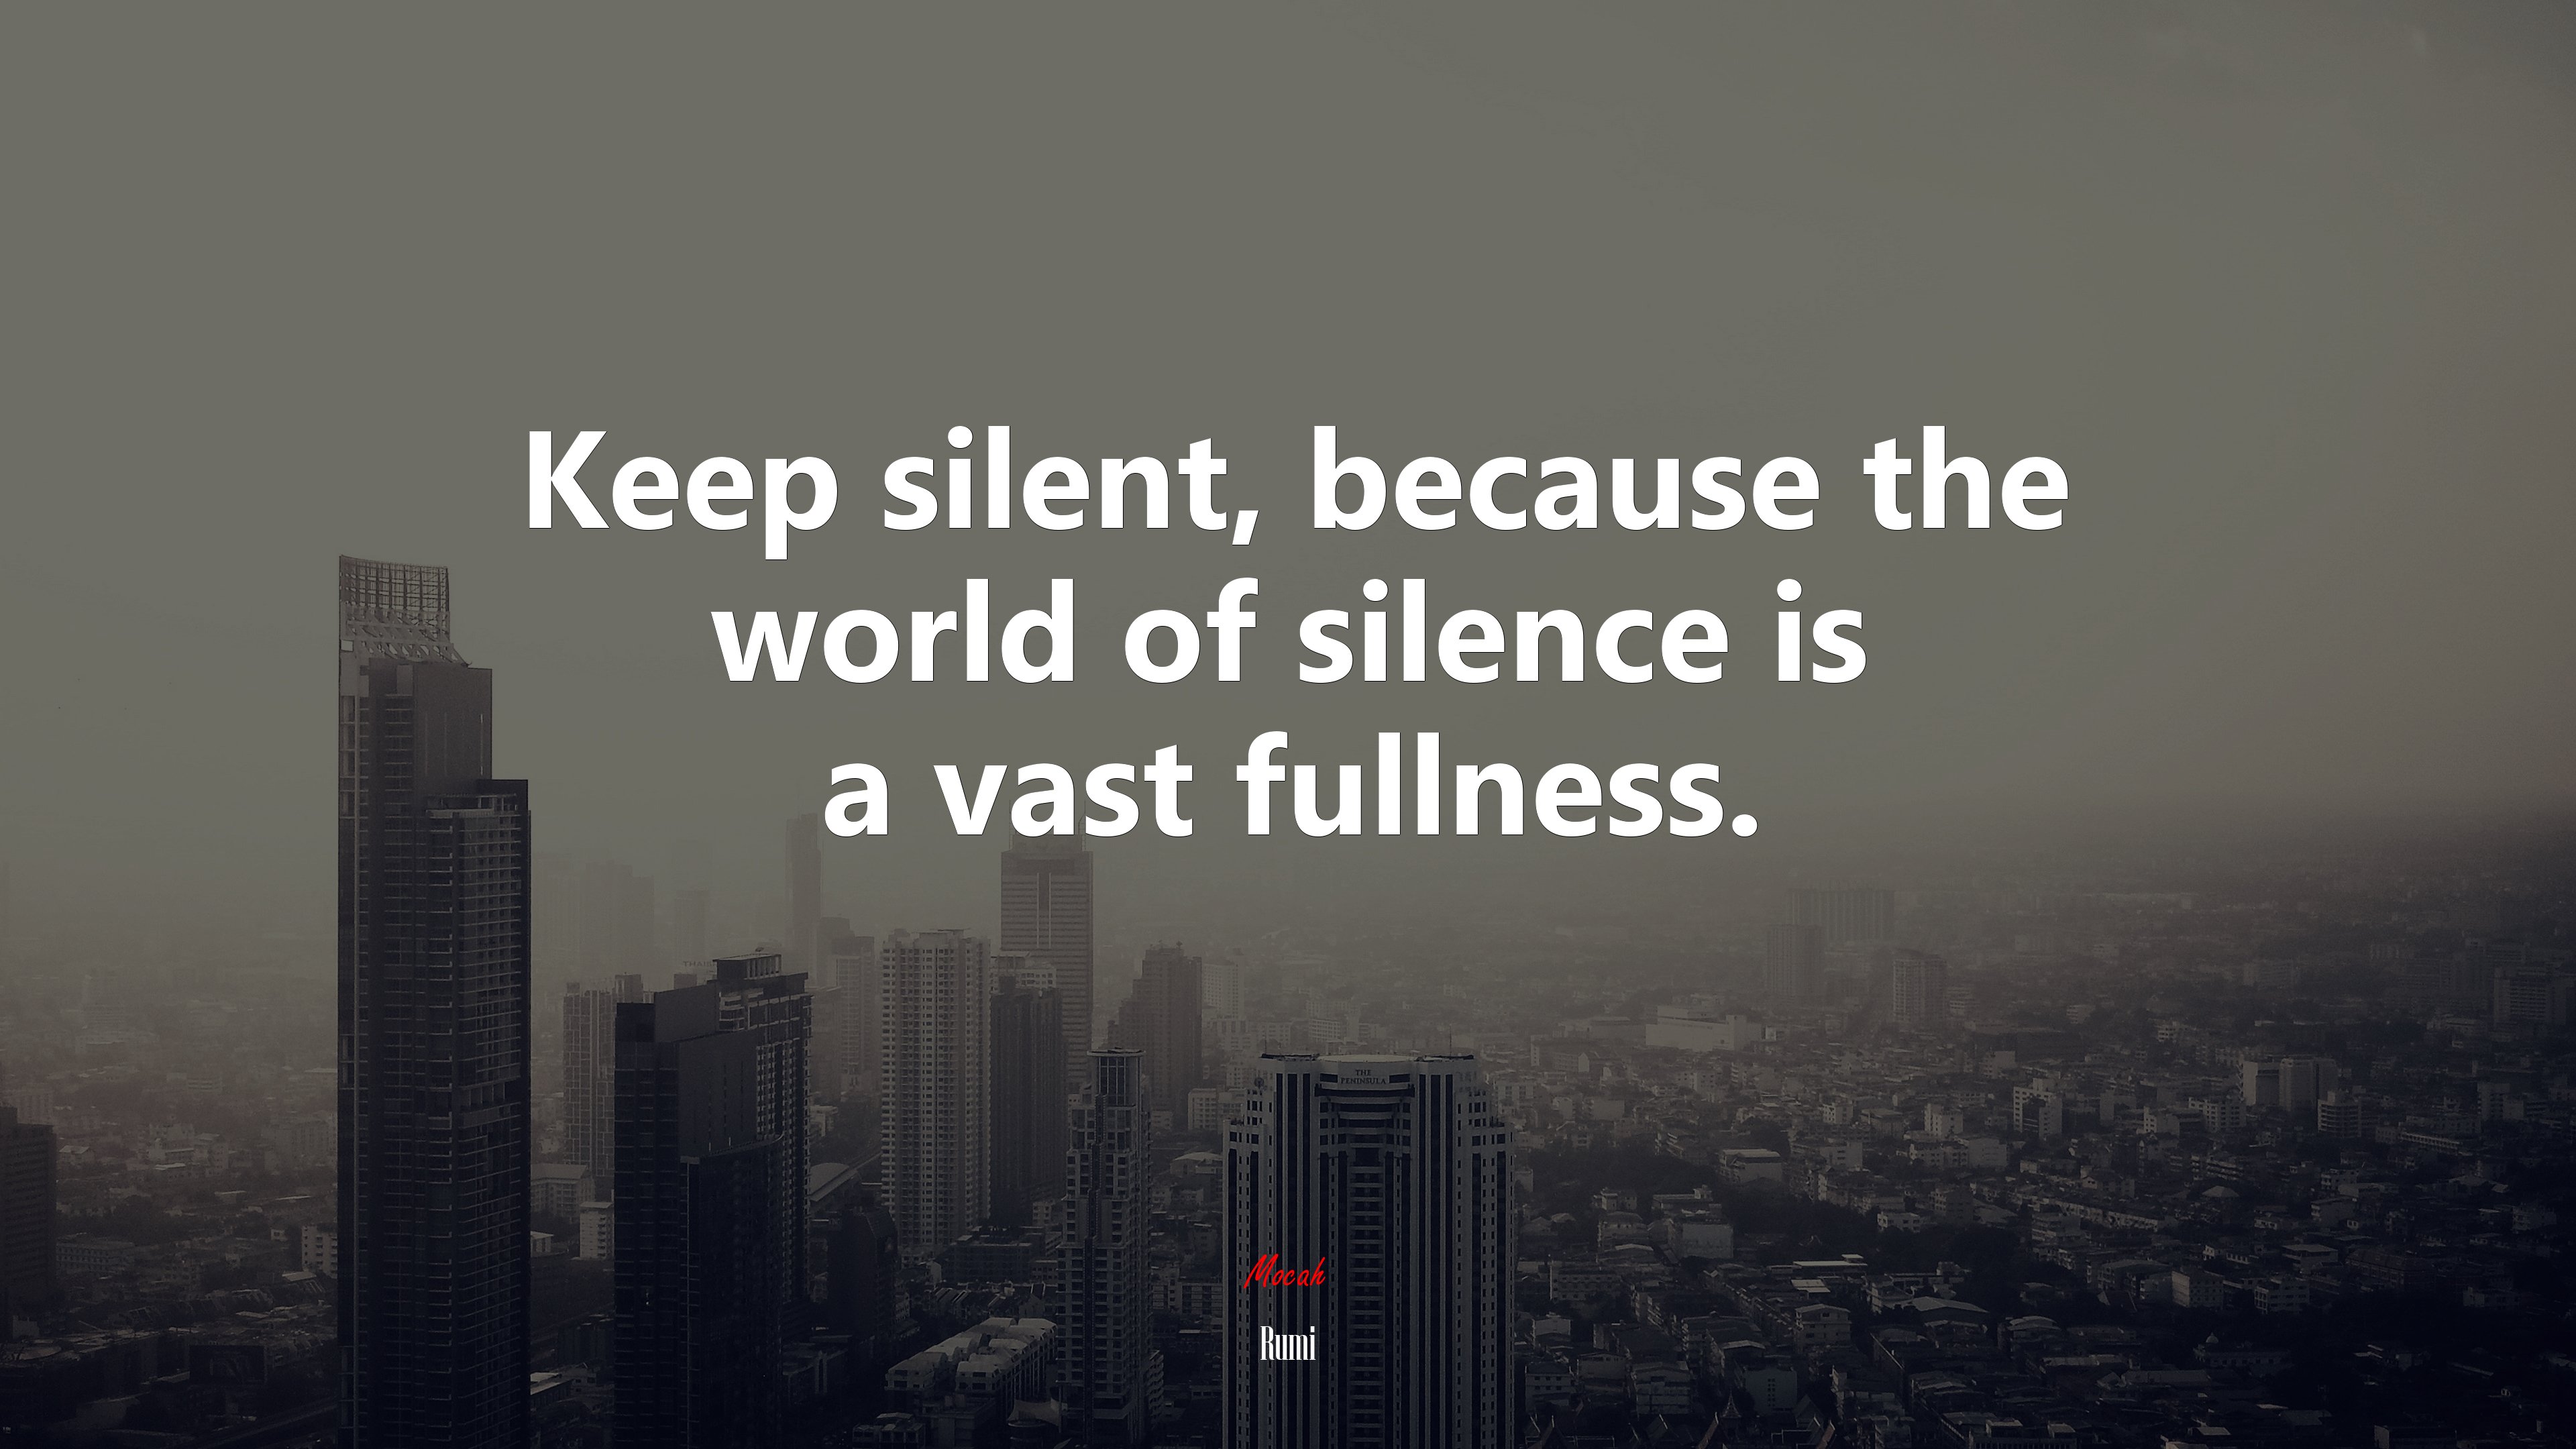 Keep silent, because the world of silence is a vast fullness. Rumi quote Gallery HD Wallpaper